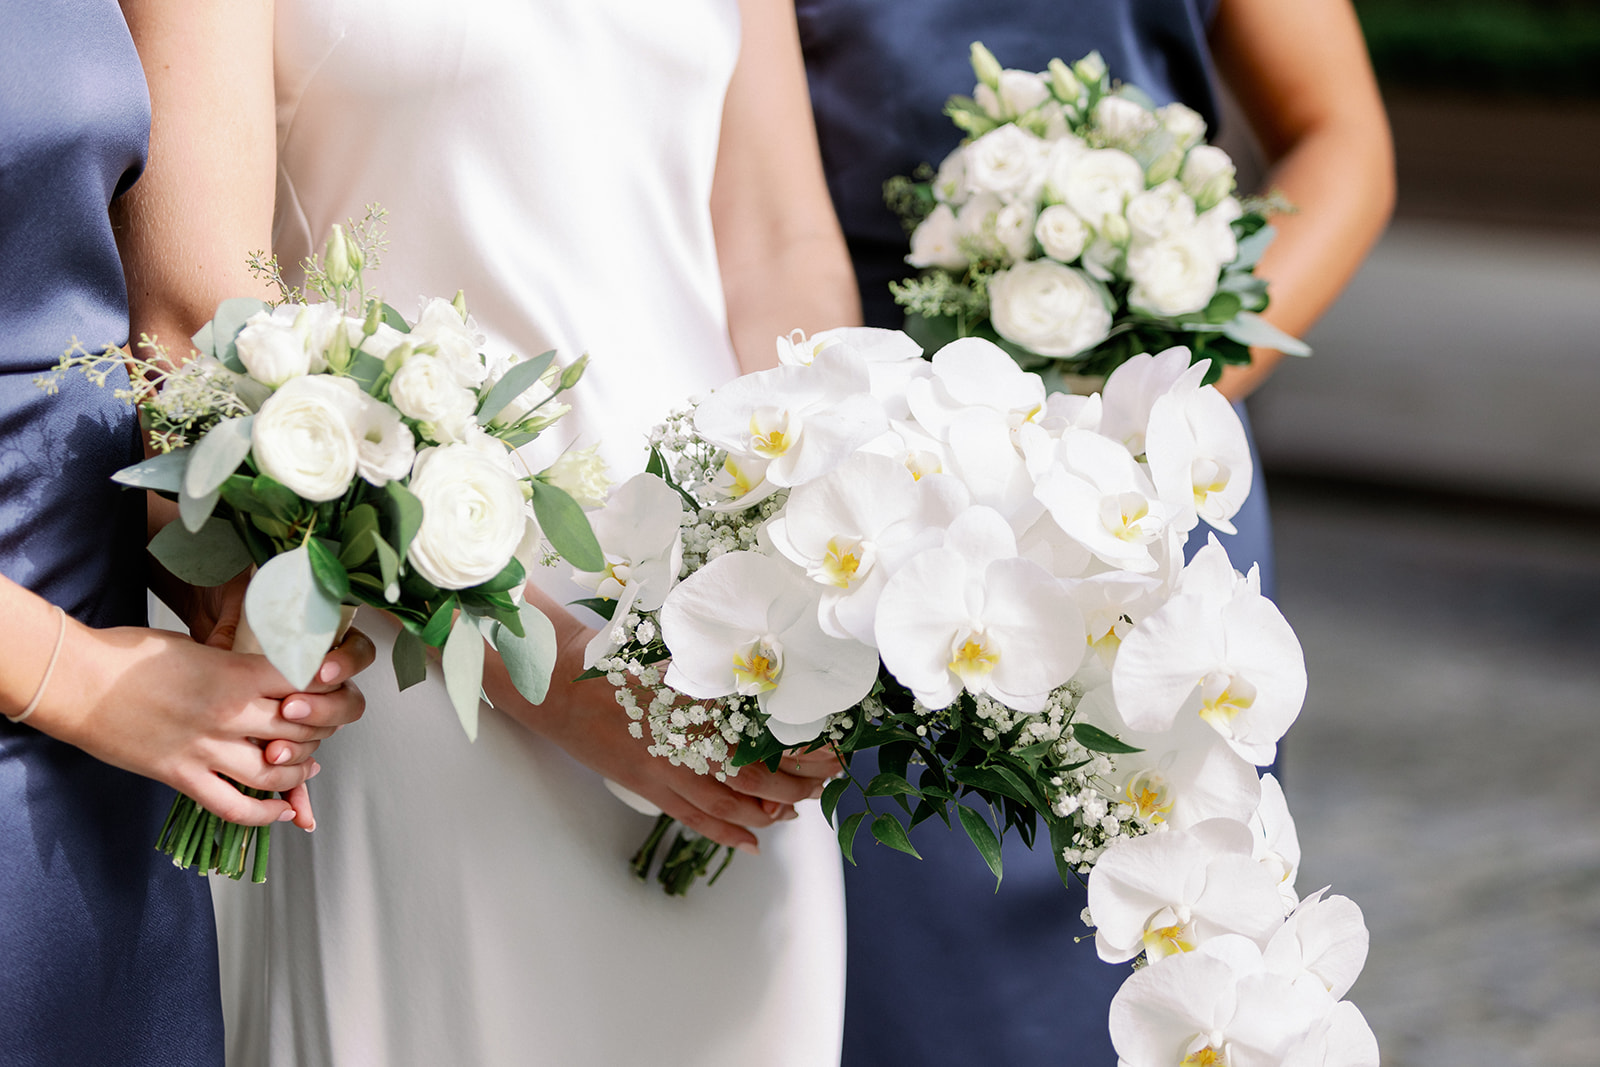 Bride and bridesmaids hold white bouquets in a stunning up-close detail shot, a beautiful New York wedding moment.